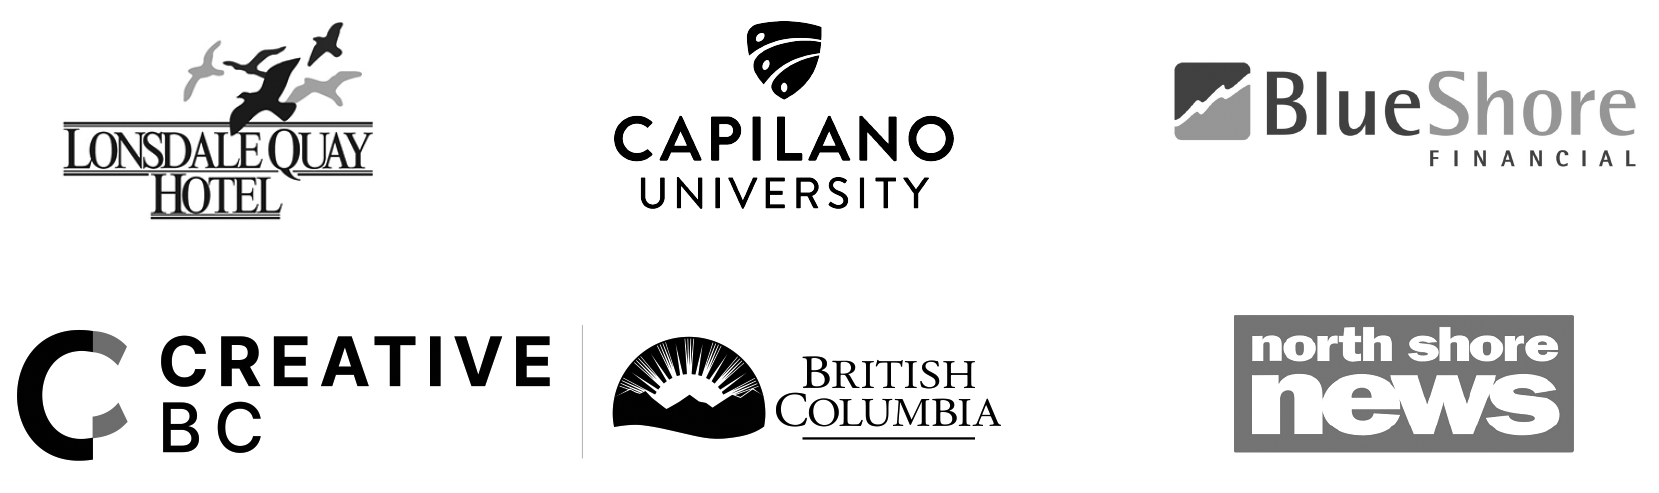 logo with Lonsdale Quay Hotel, CapU, BlueShore, Creative BC, and North Shore News.